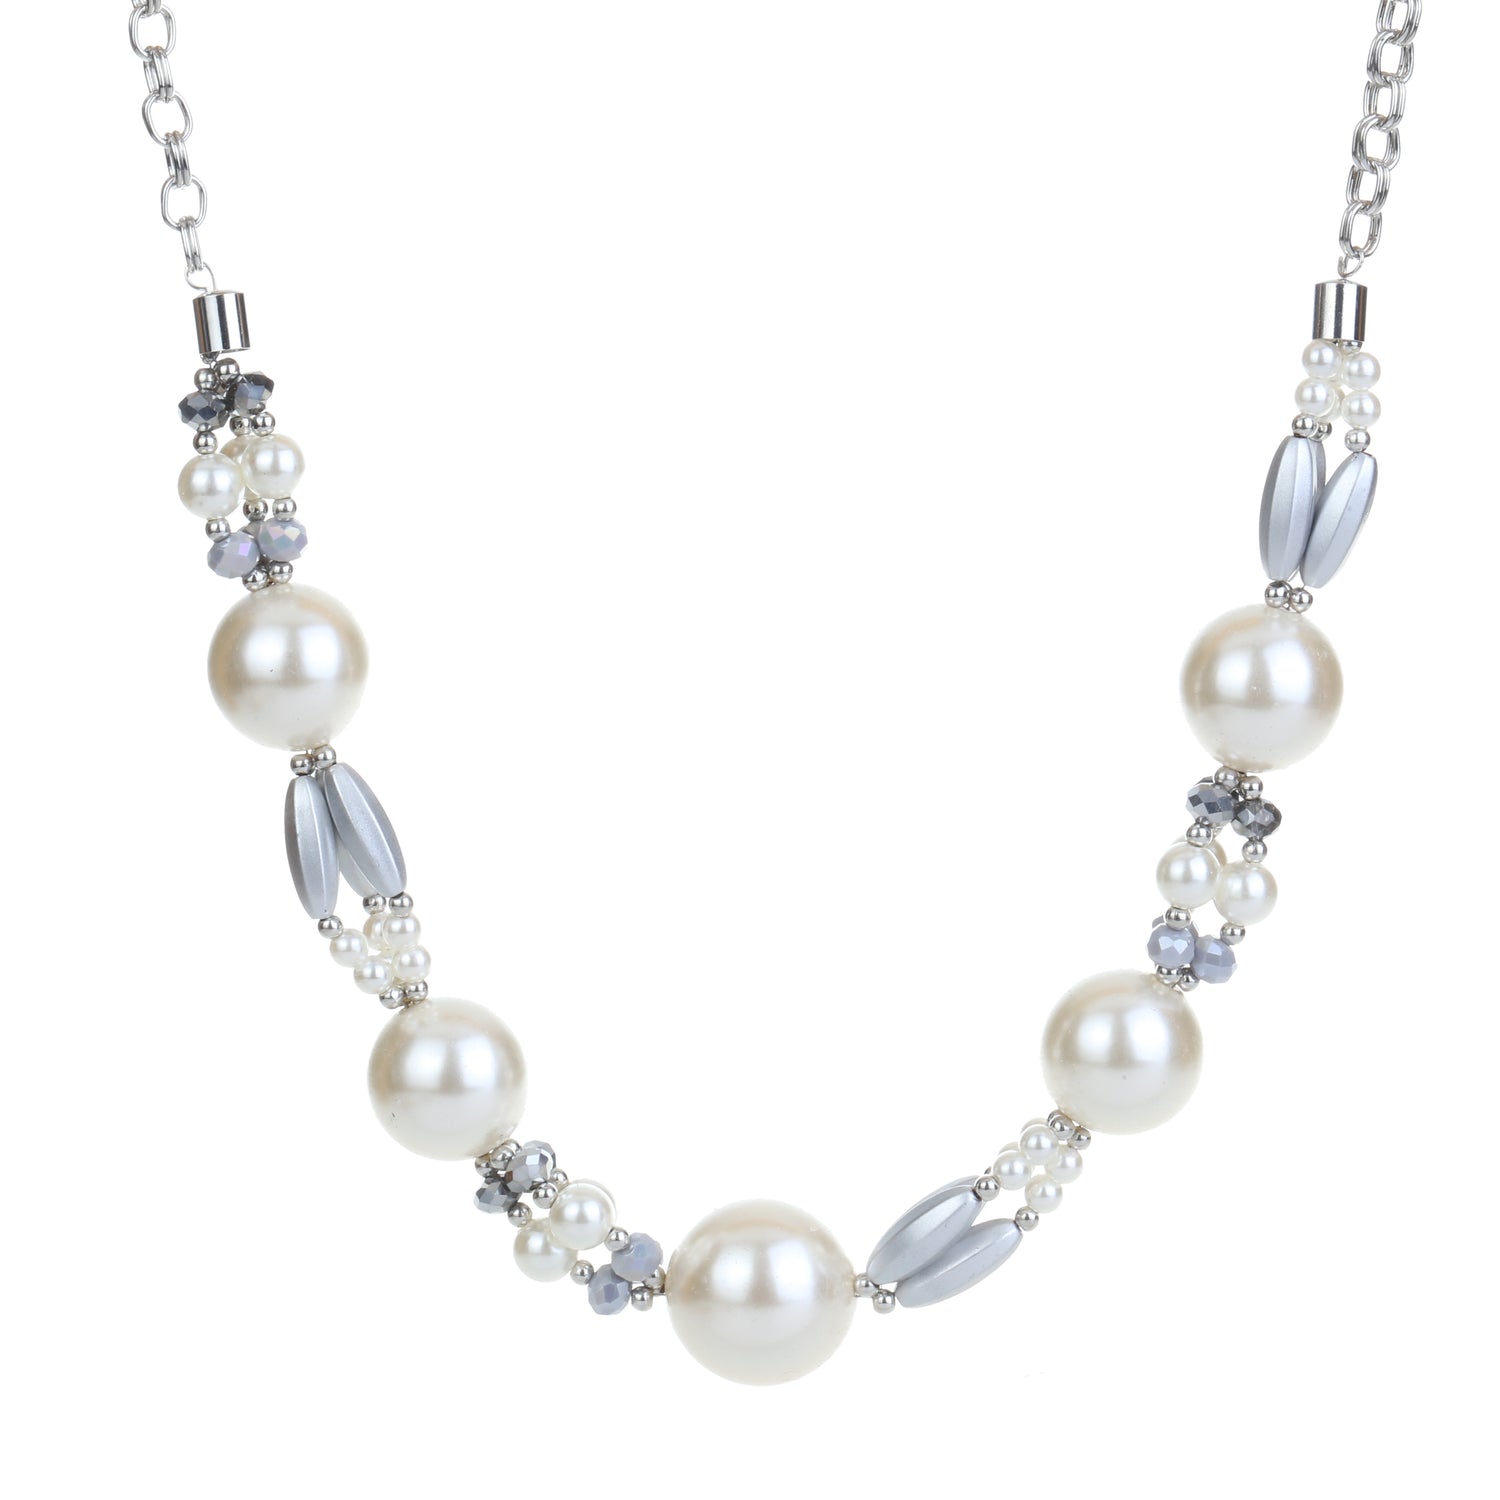 Statement Pearl Detail Necklace